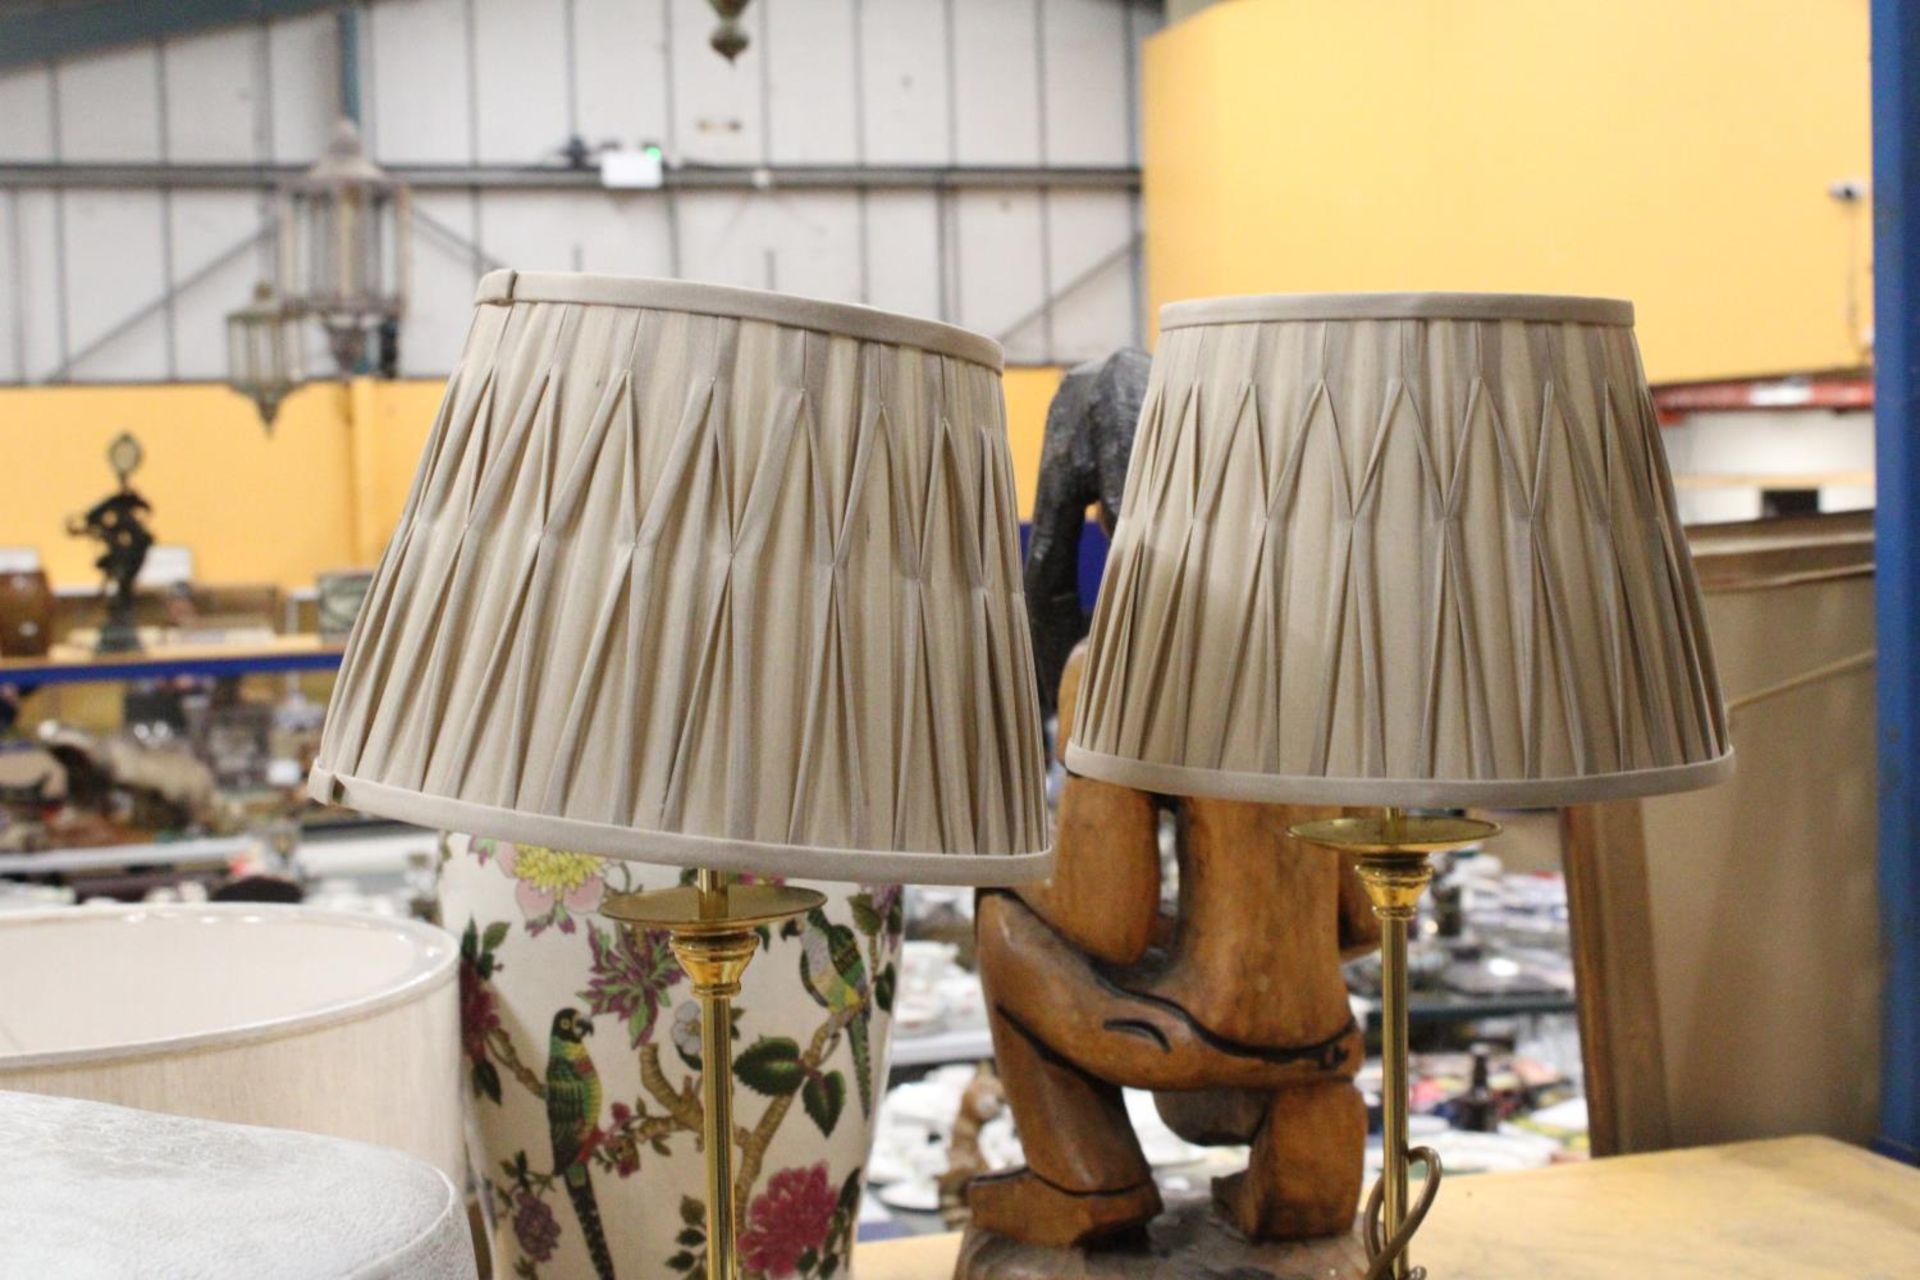 A PAIR OF BRASS TABLE LAMPS WITH SHADES PLUS A TIFFANY STYLE LIGHT SHADE - Image 3 of 6